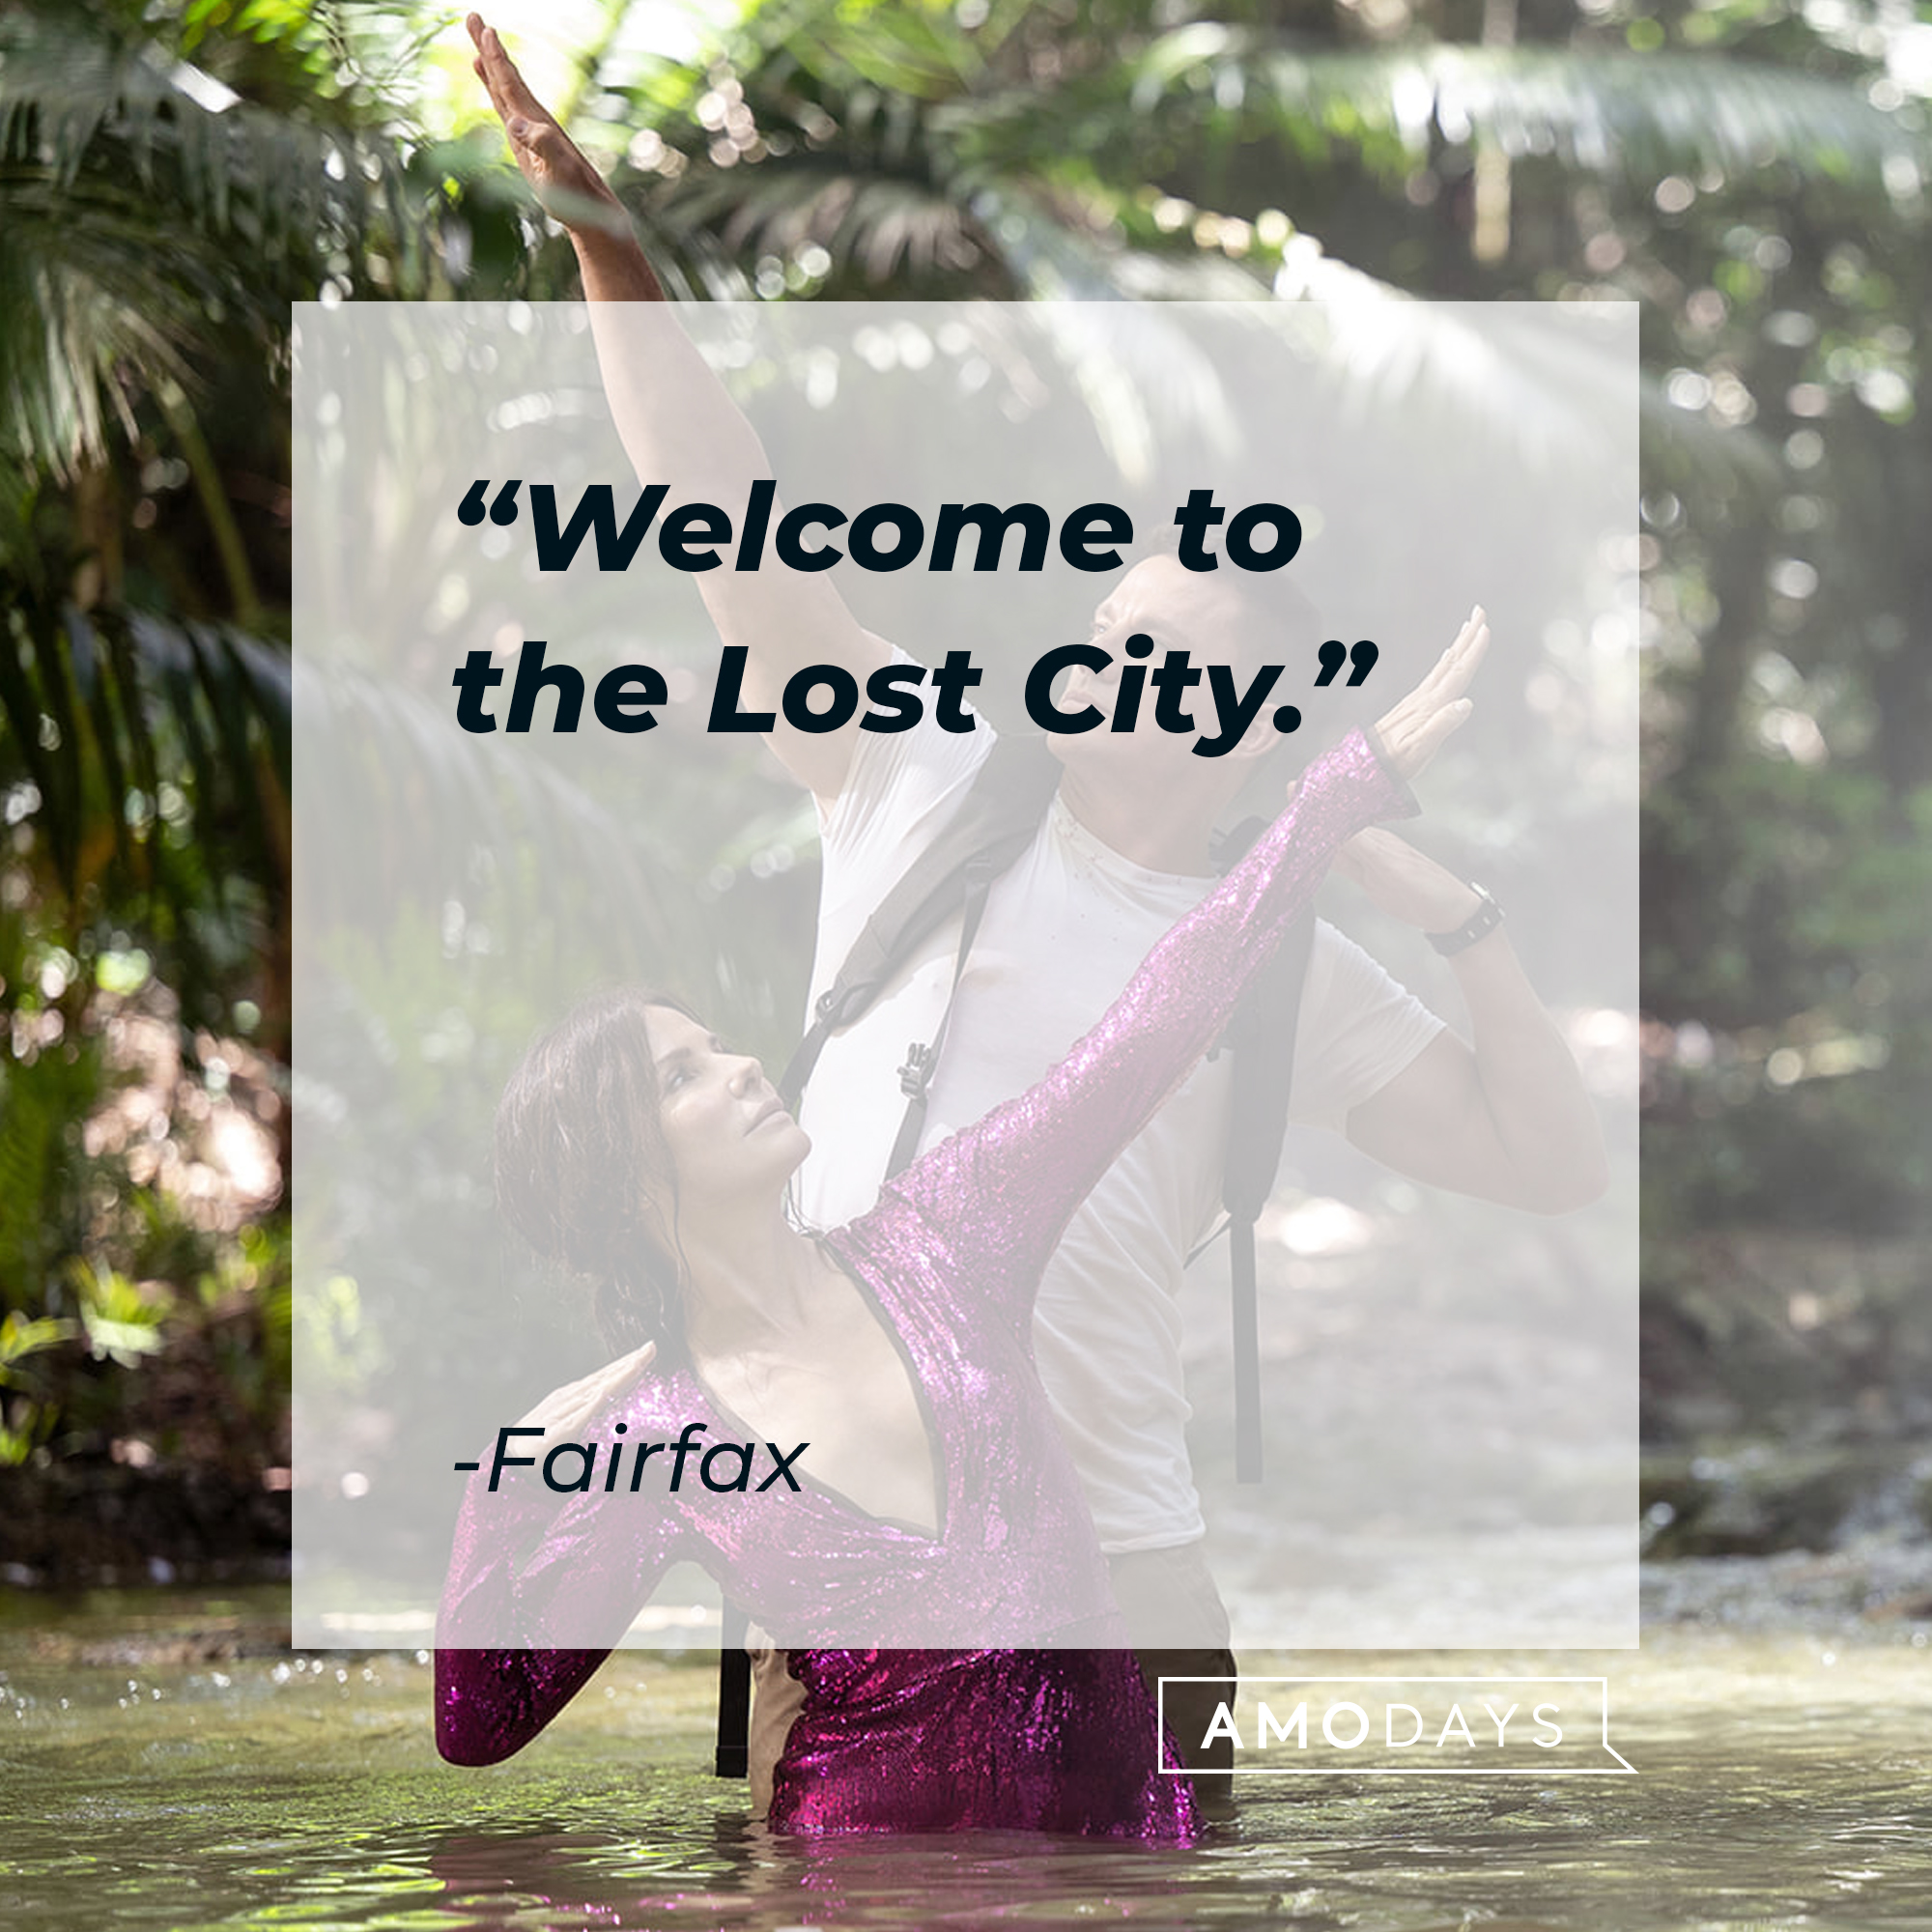 Fairfax with his quote: "Welcome to the Lost City." | Source: facebook.com/TheLostCityMovie